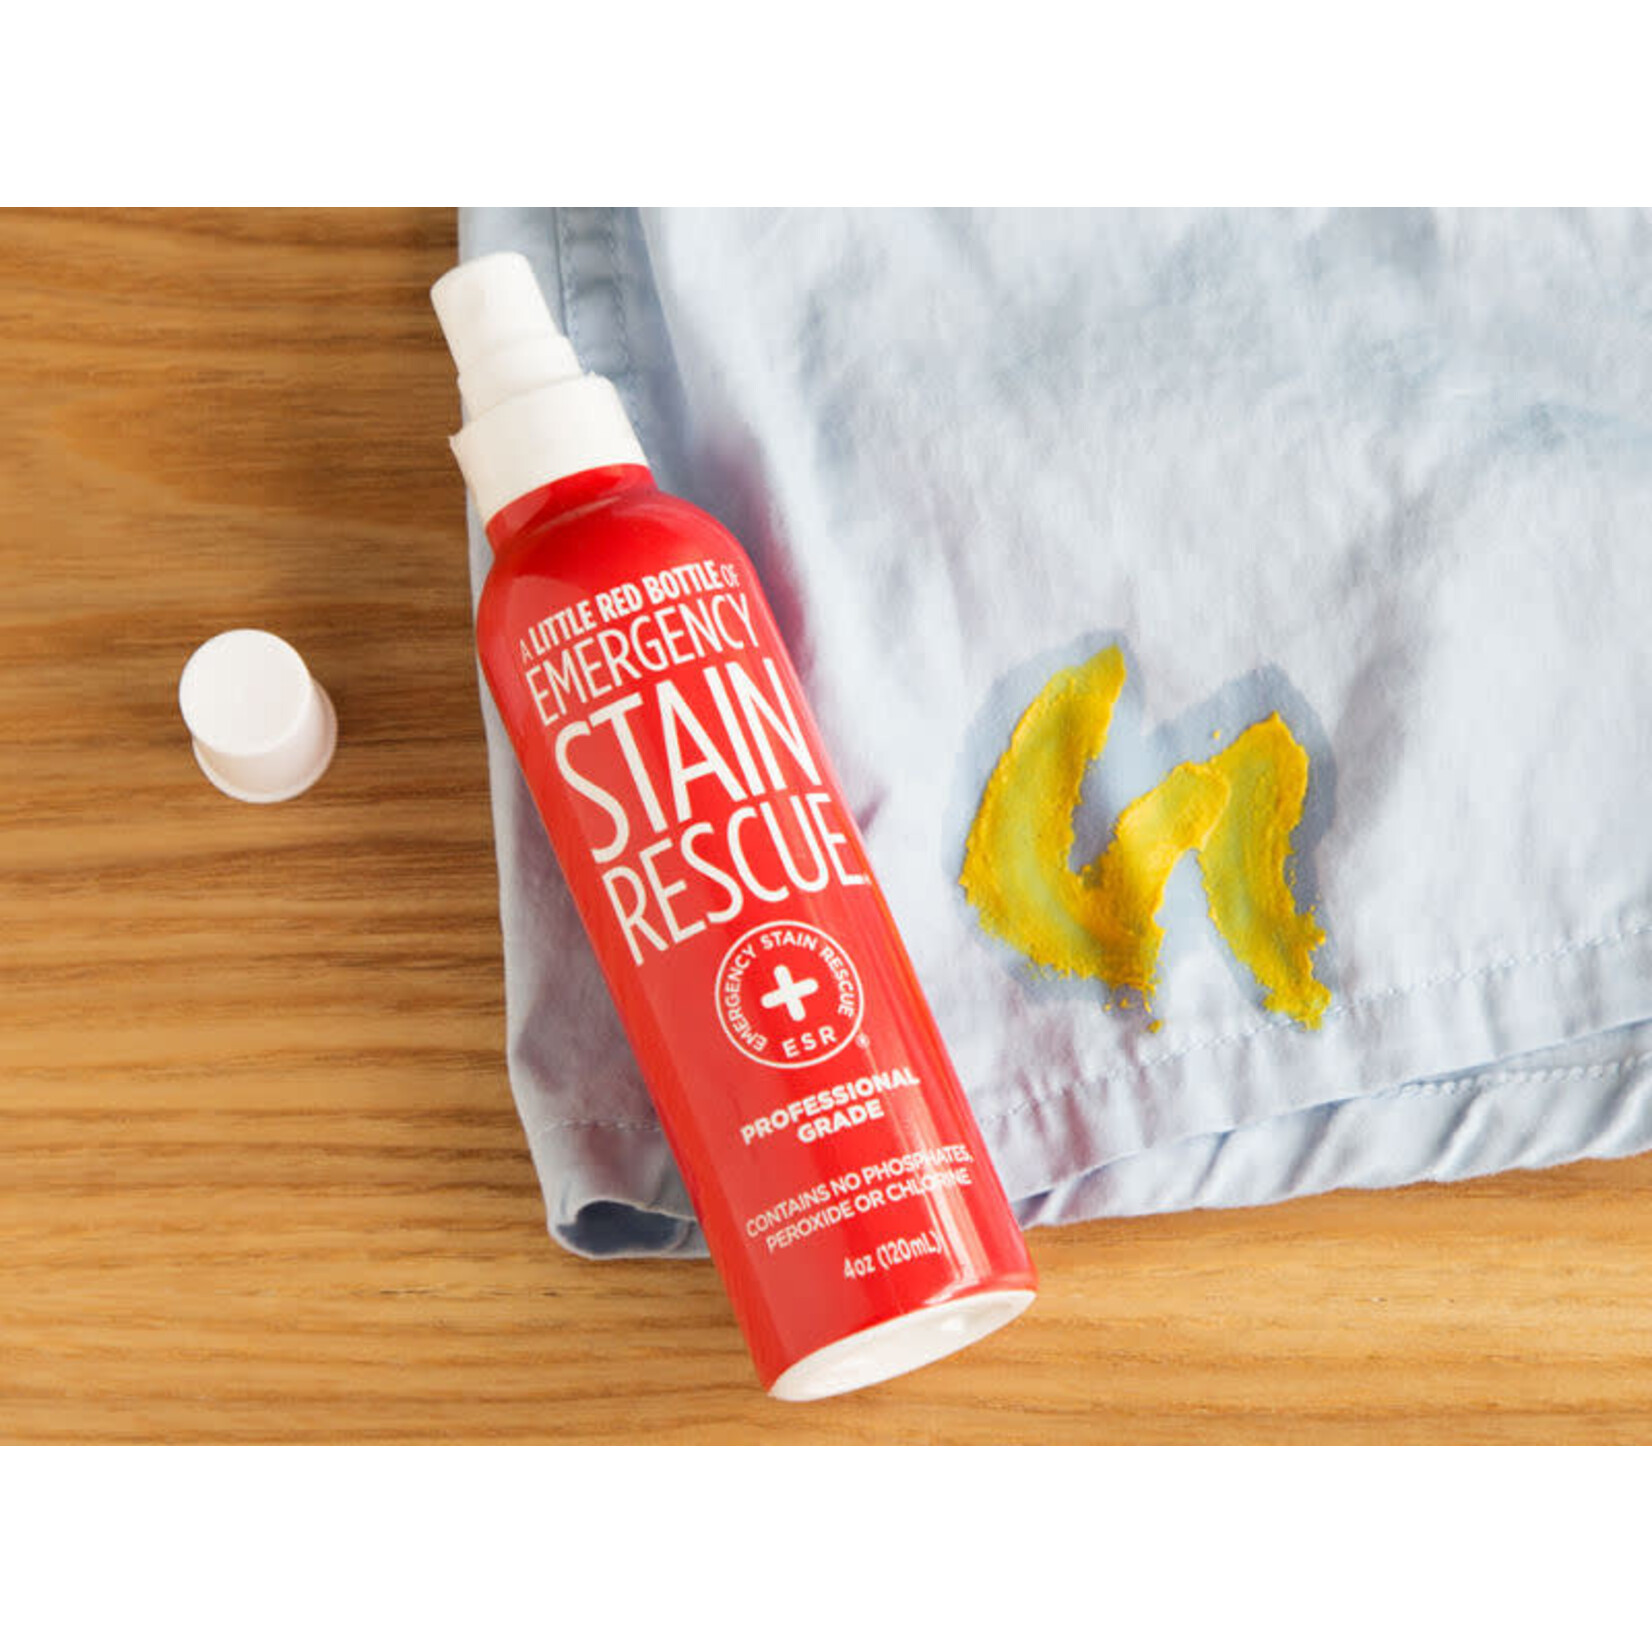 The Hate Stains Co Emergency Stain Remover